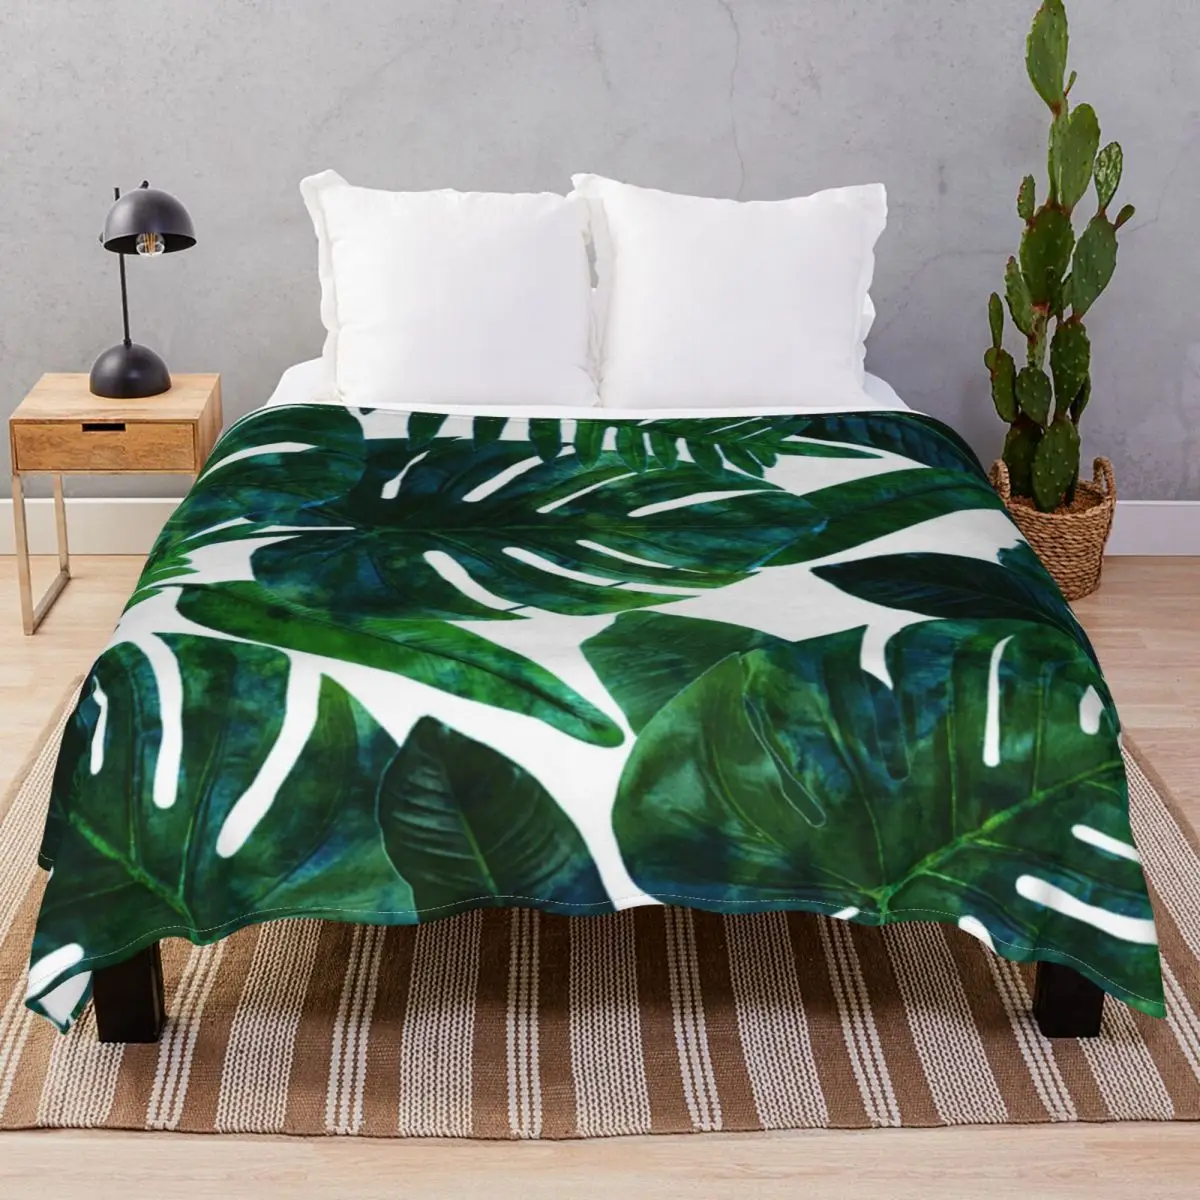 Dream Tropical Jungle Blankets Fleece Spring Autumn Super Warm Throw Blanket for Bed Home Couch Travel Cinema